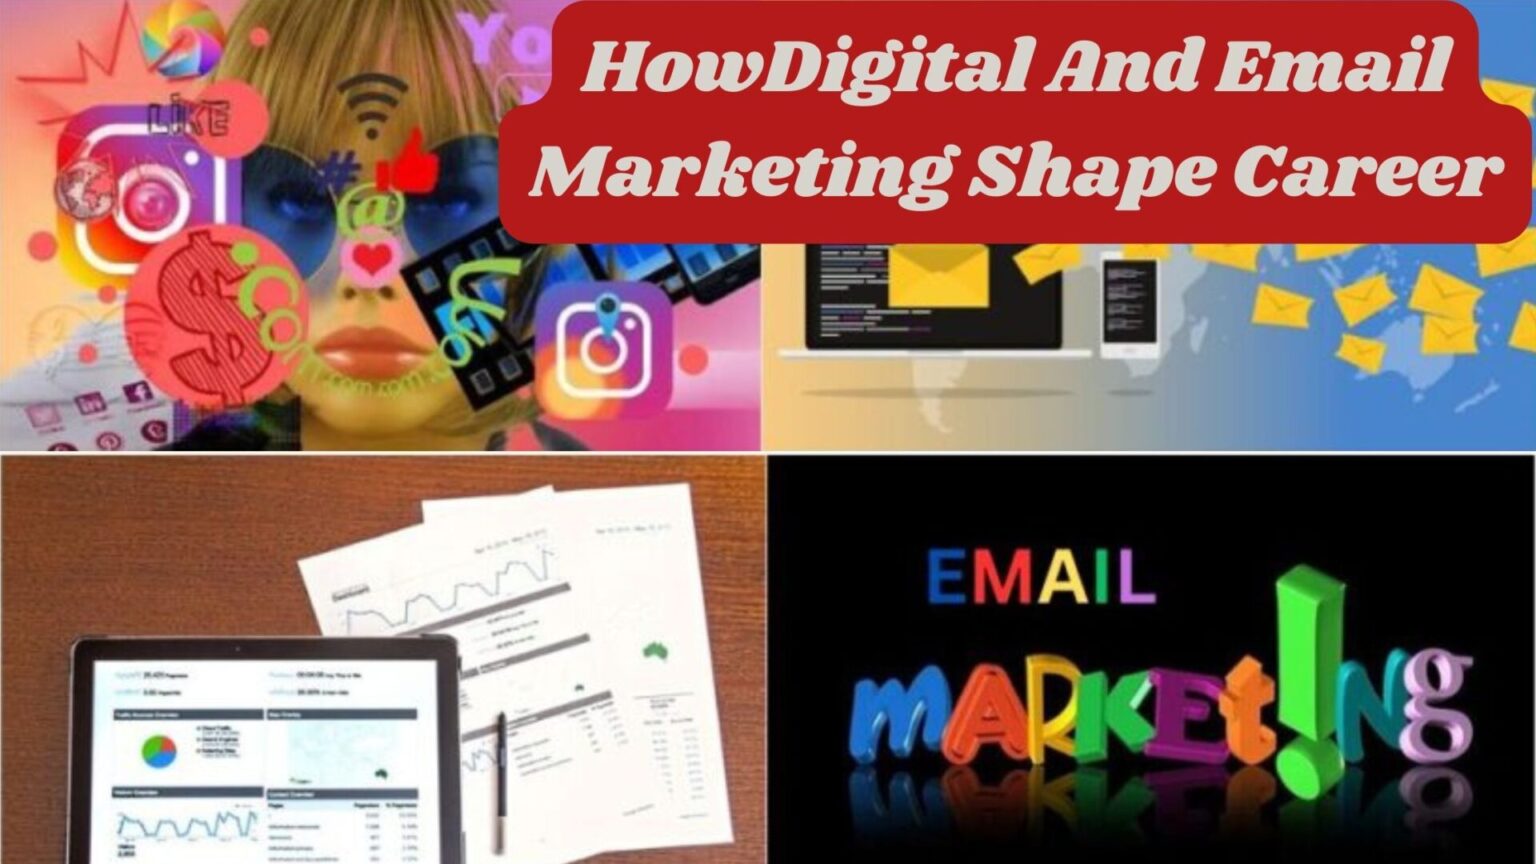 How Digital And Email Marketing Shape Career